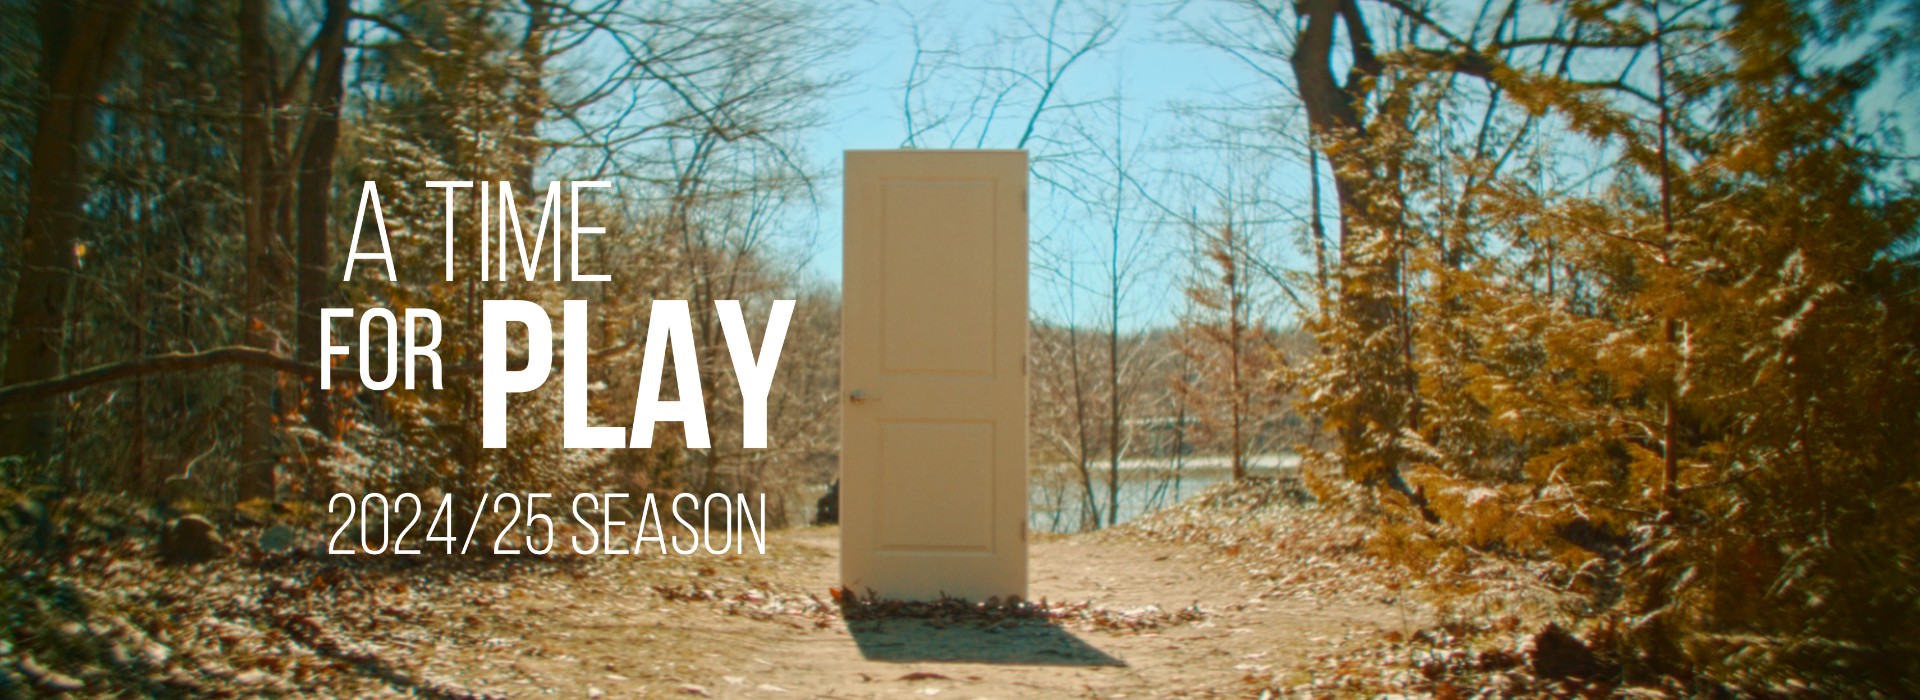 A door stands out of place on an outdoor pathway. Text: A Time for Play. 2024/25 Season.